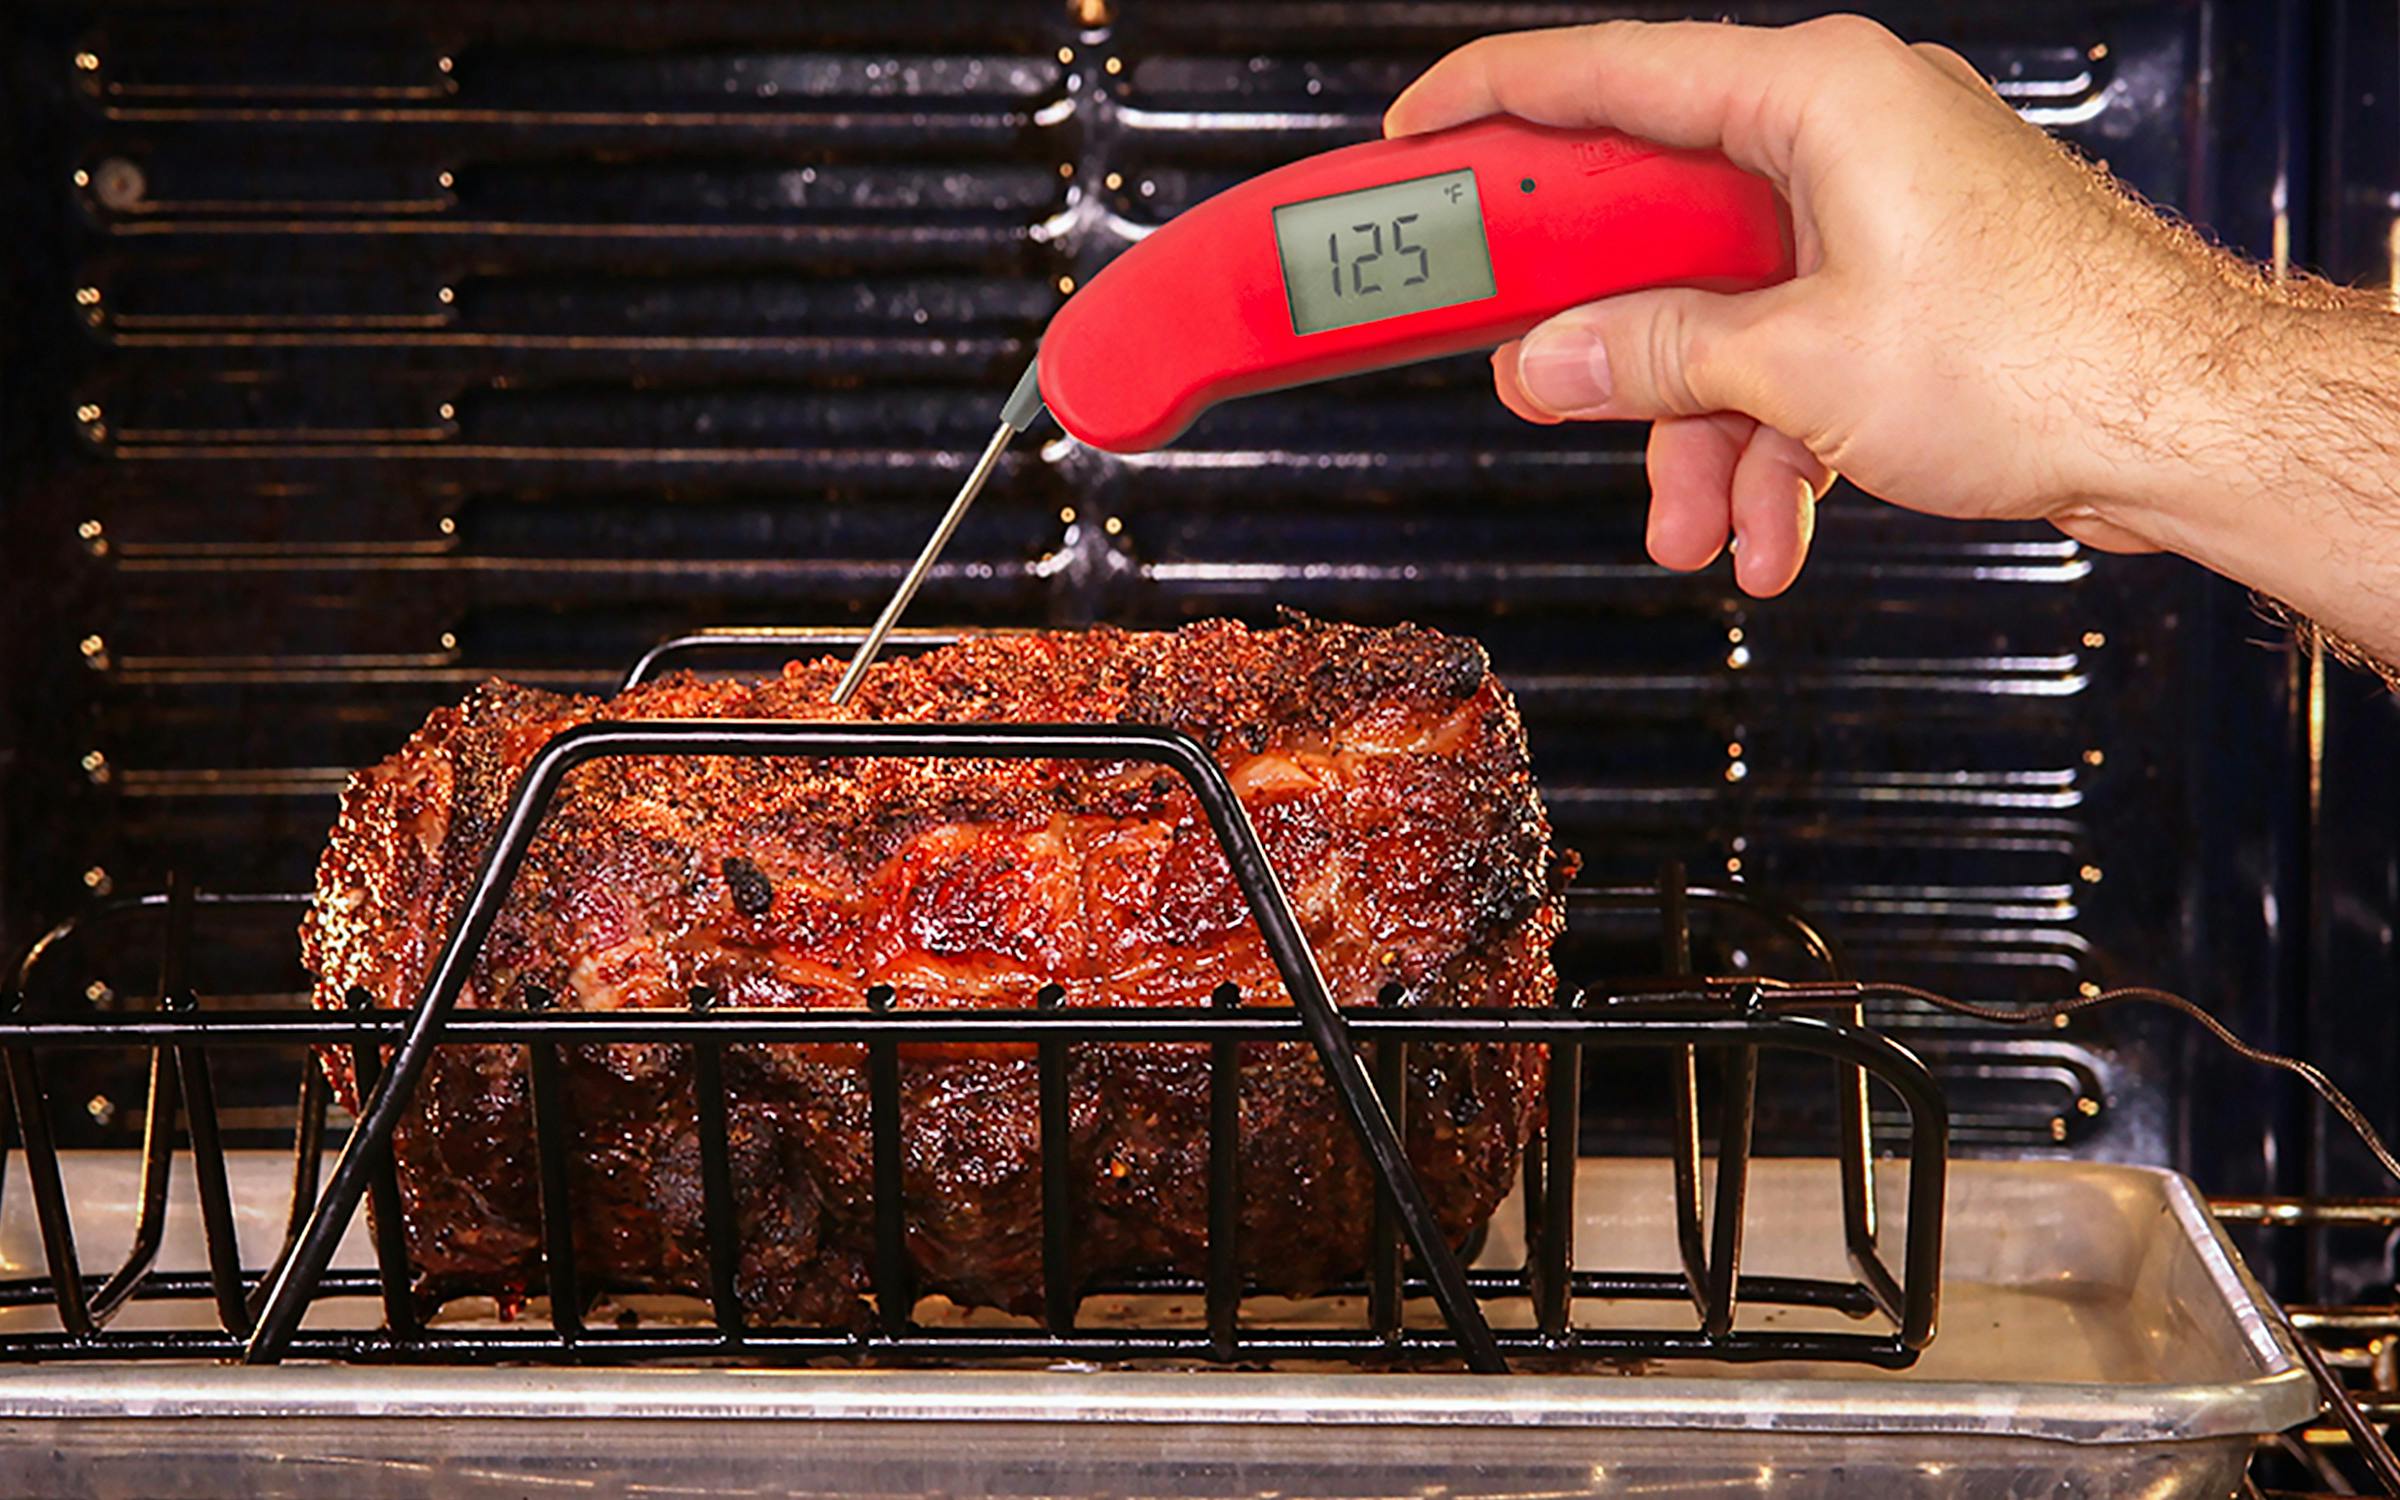 https://img.texasmonthly.com/2020/11/bbq-gift-guide-thermapen.jpg?auto=compress&crop=faces&fit=fit&fm=pjpg&ixlib=php-3.3.1&q=45